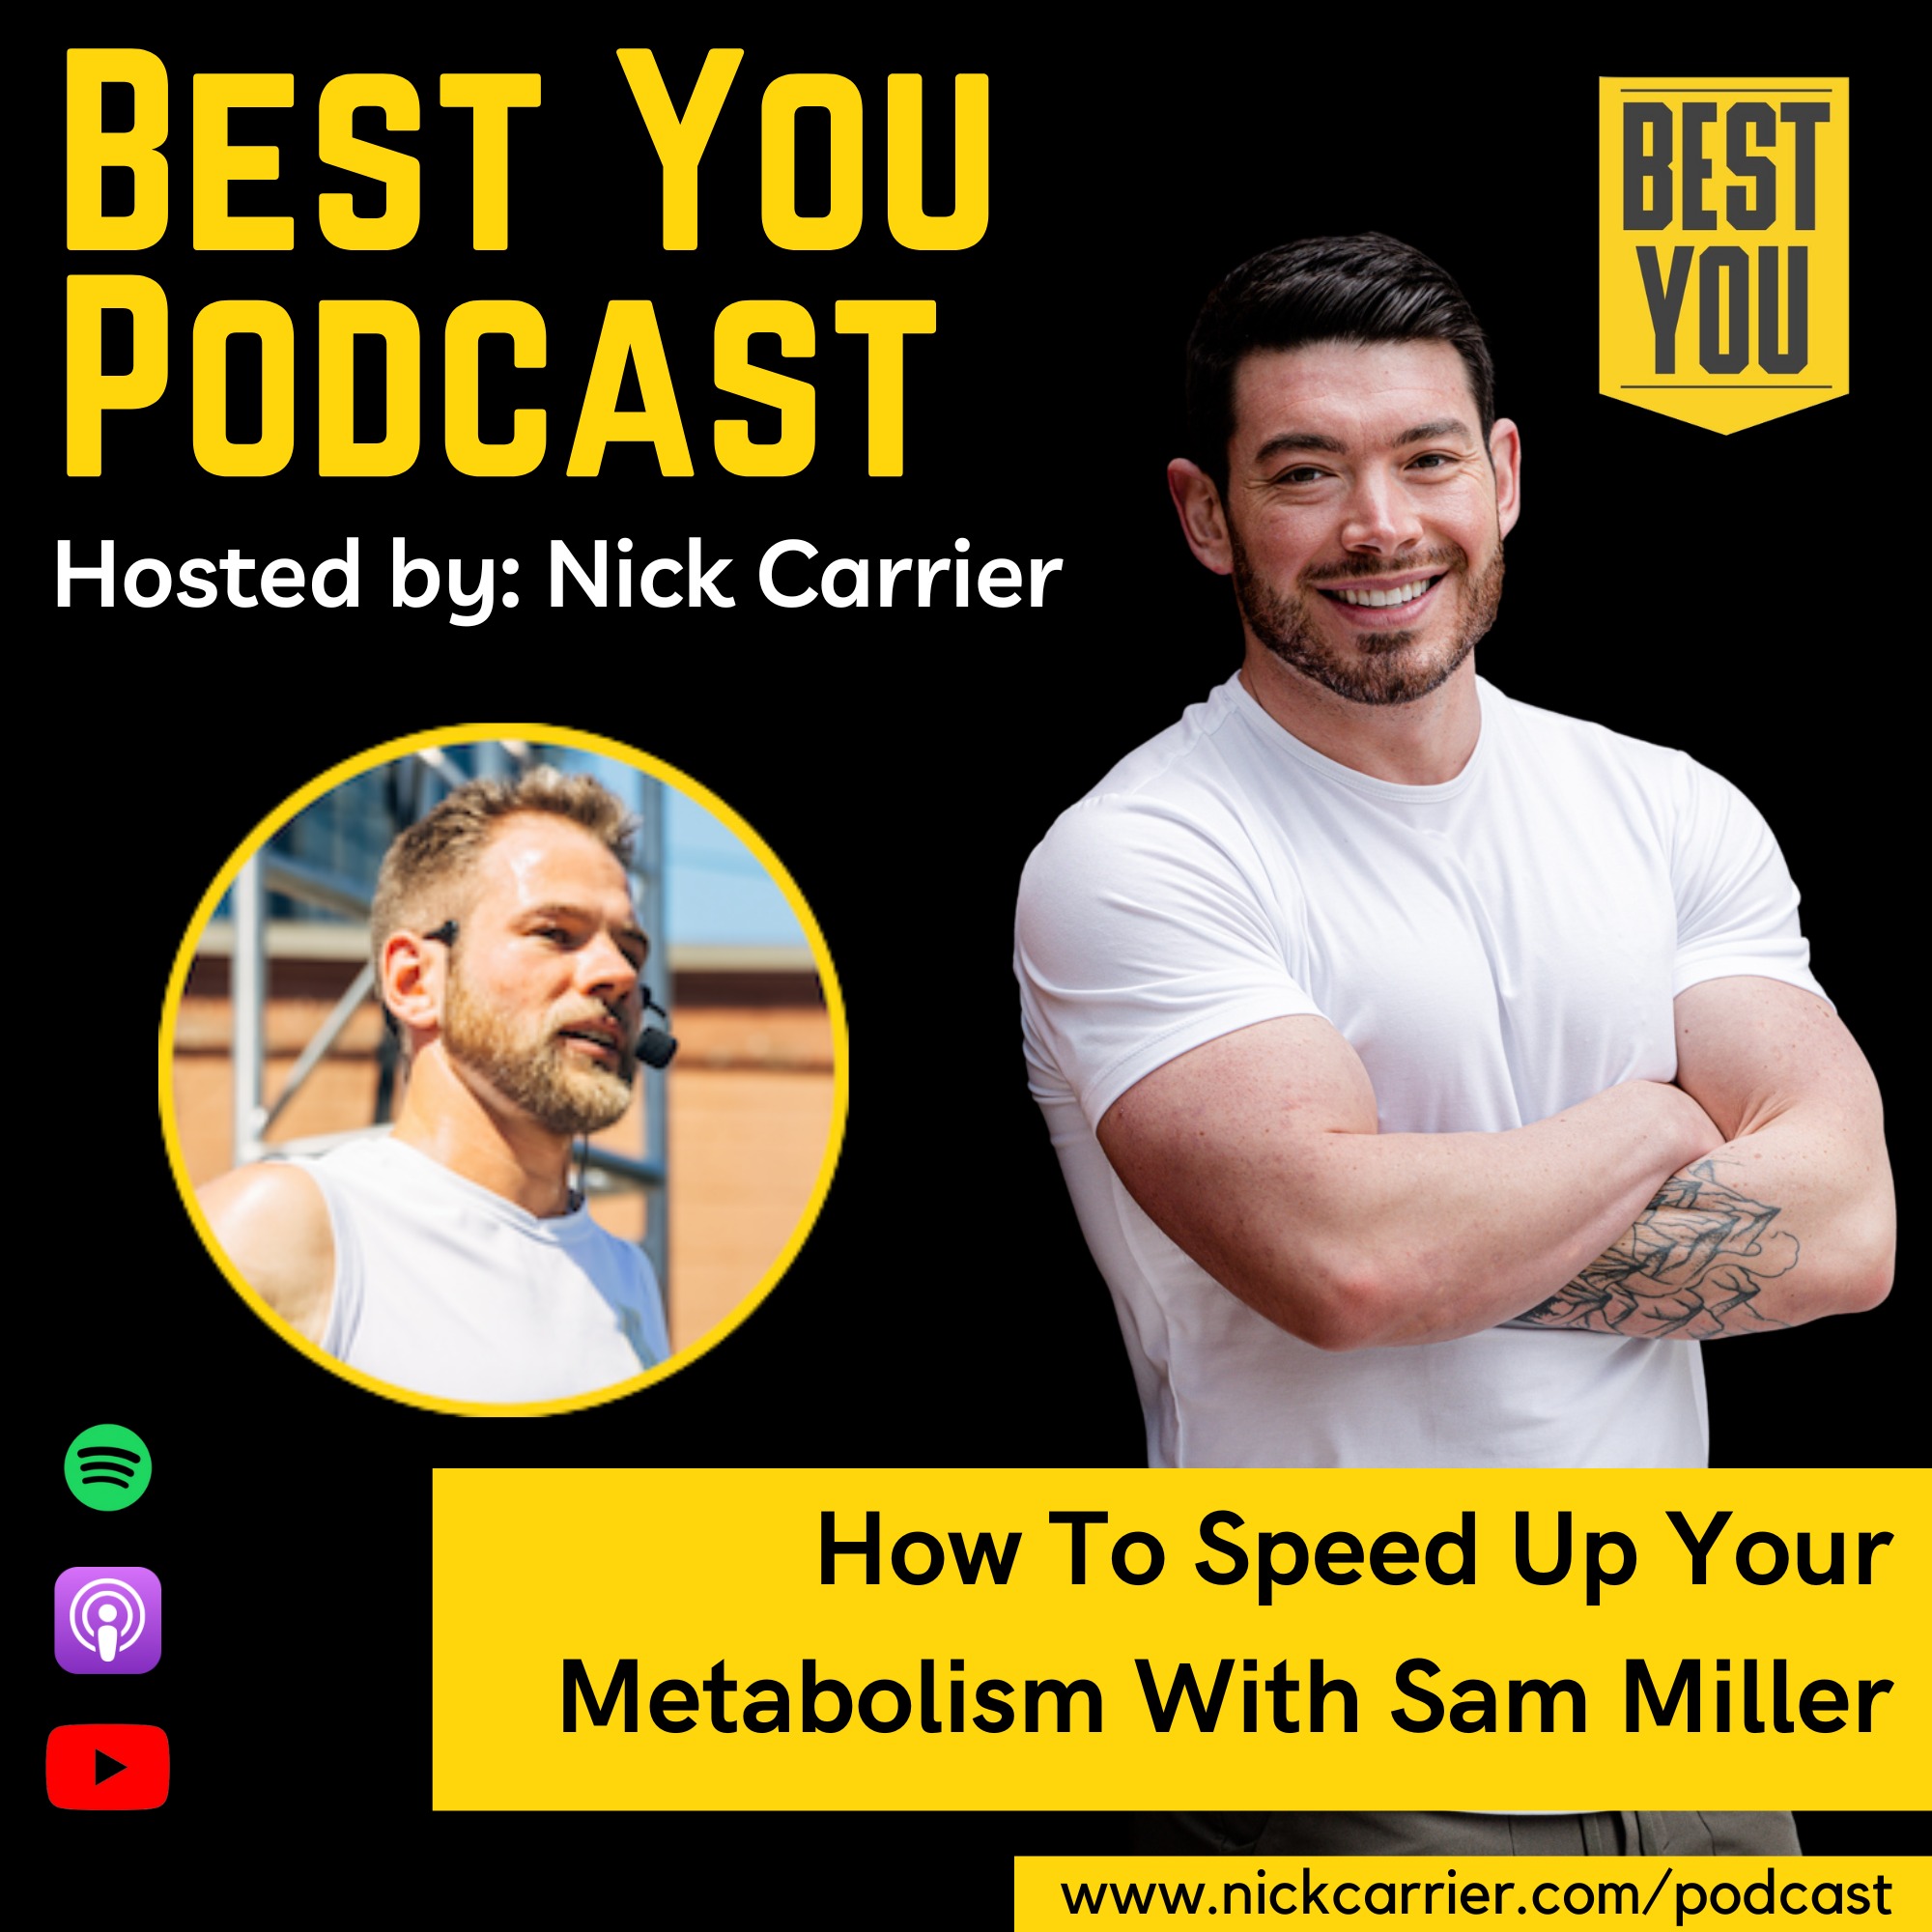 How To Speed Up Your Metabolism With Sam Miller